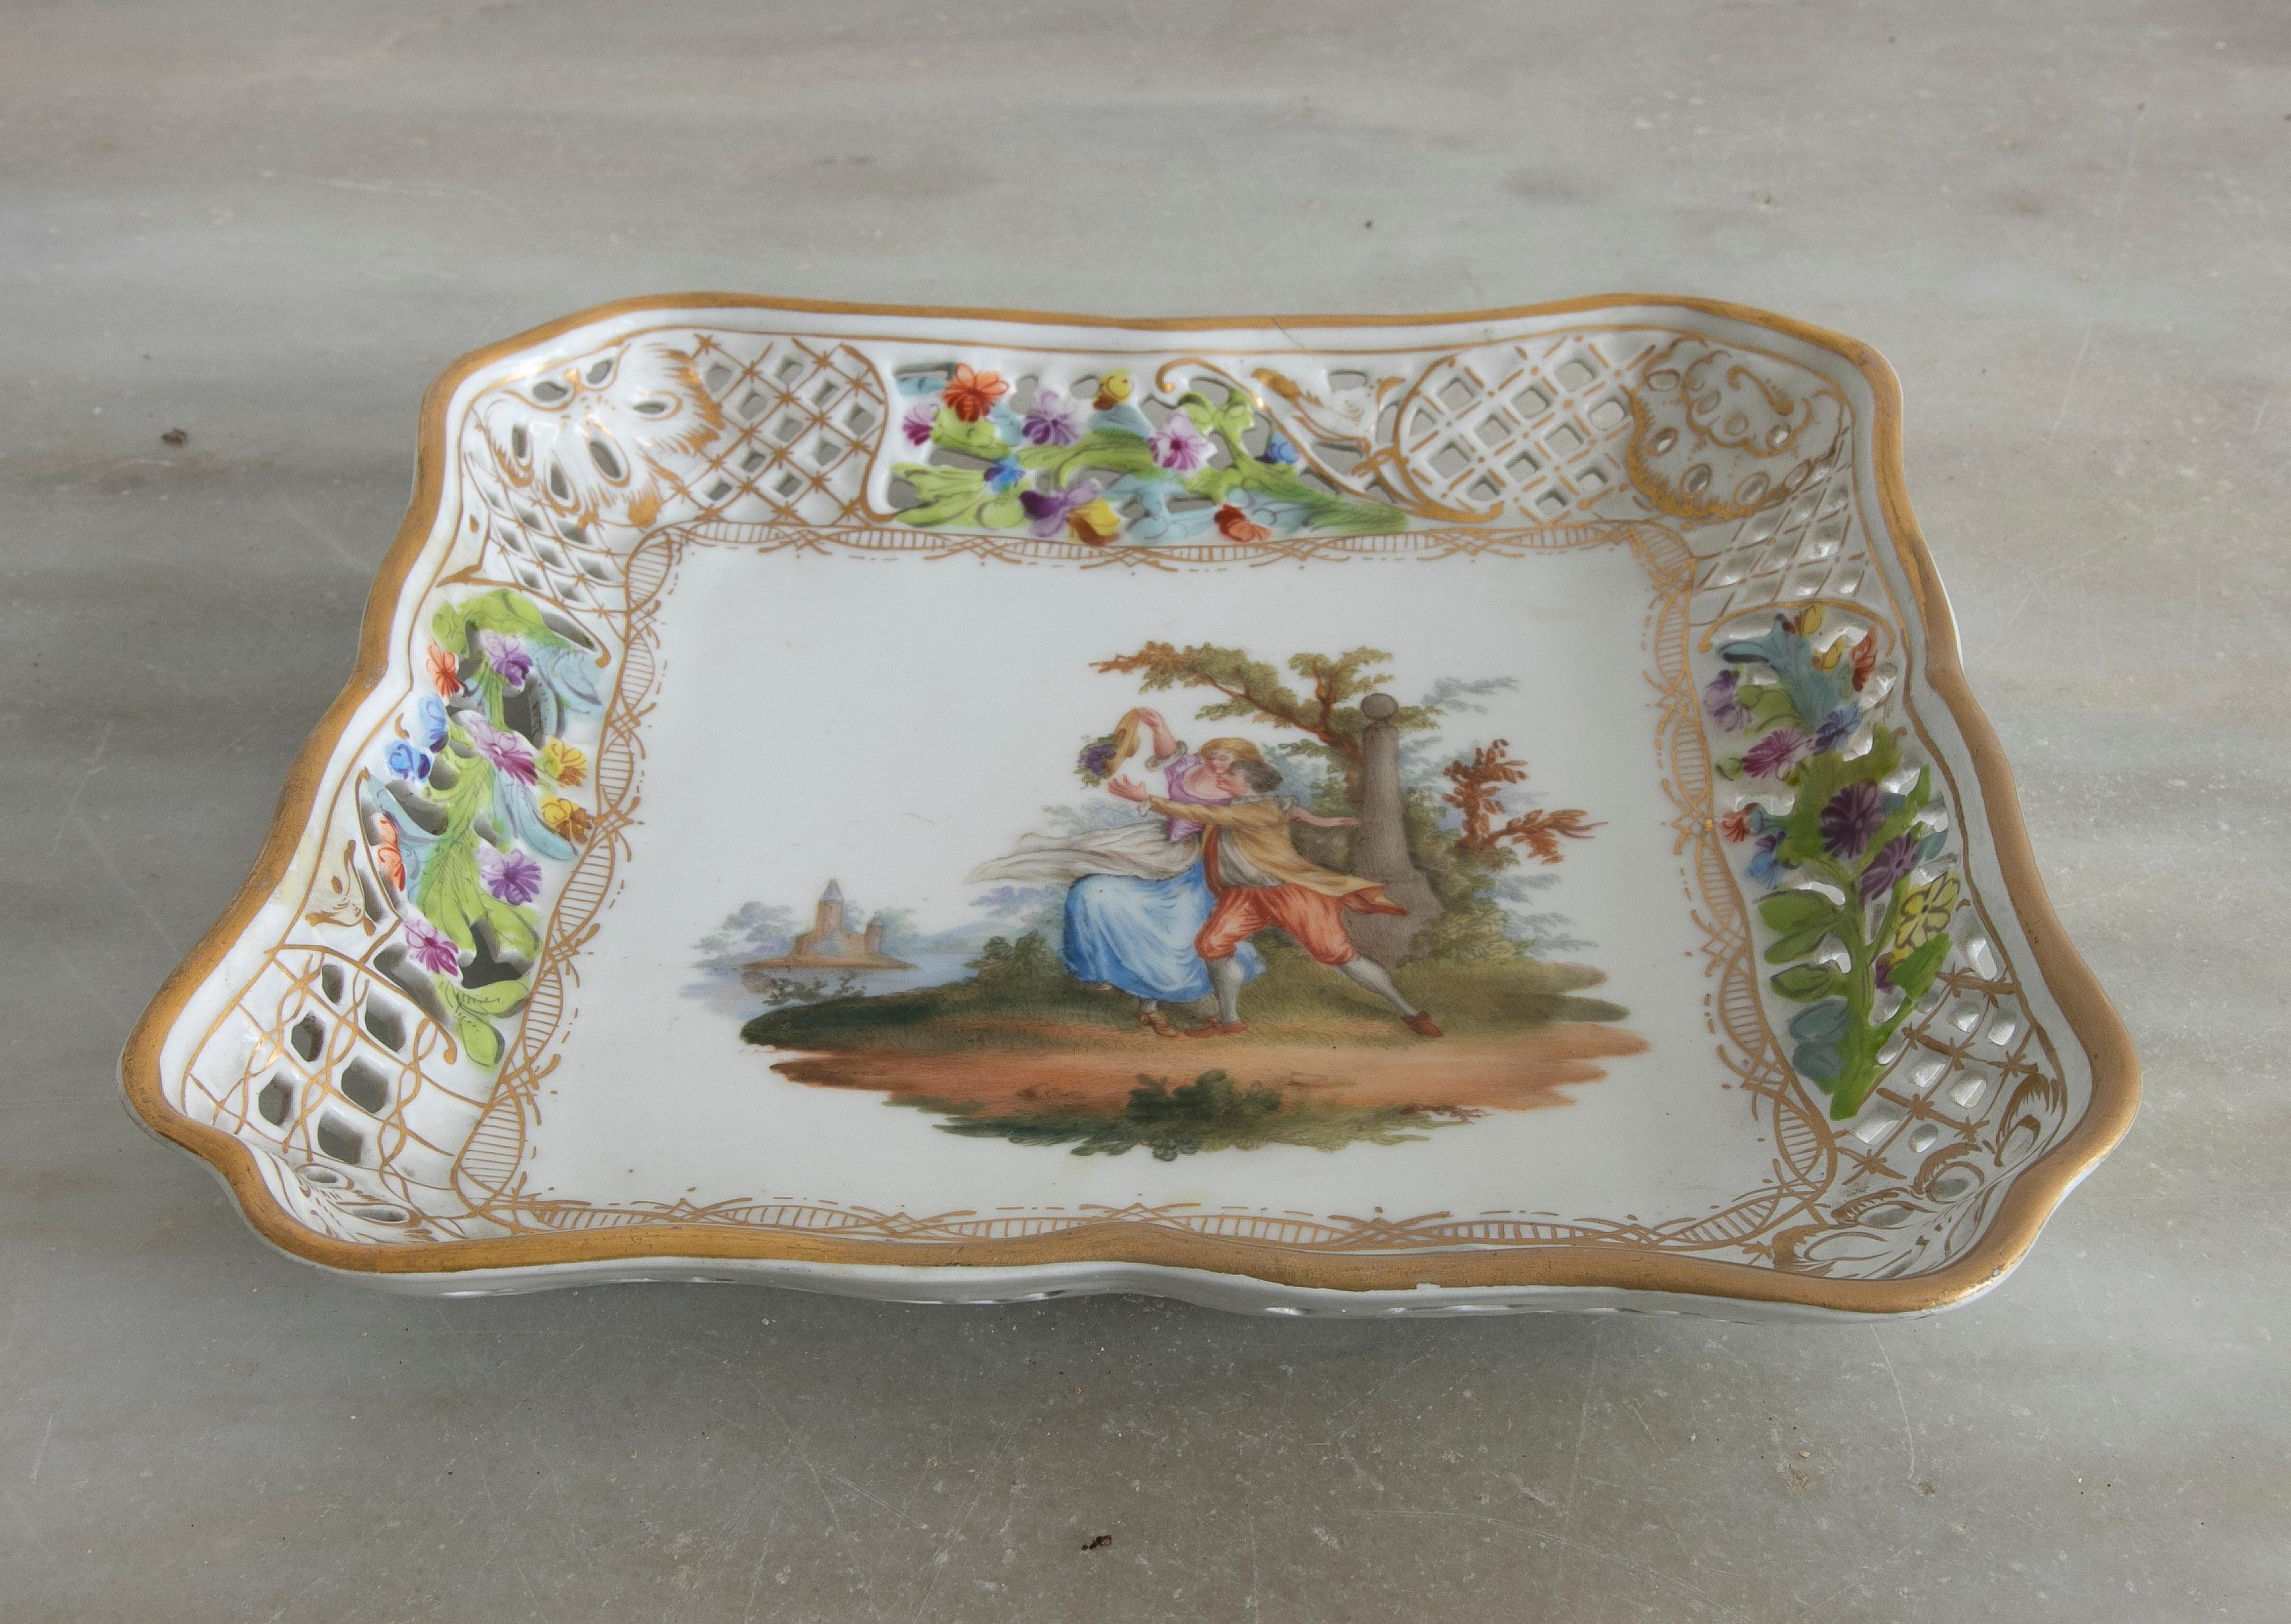 Original 1950s German Meissen stamped porcelain painted tray with man and woman festive vignette and typical flower decorations.